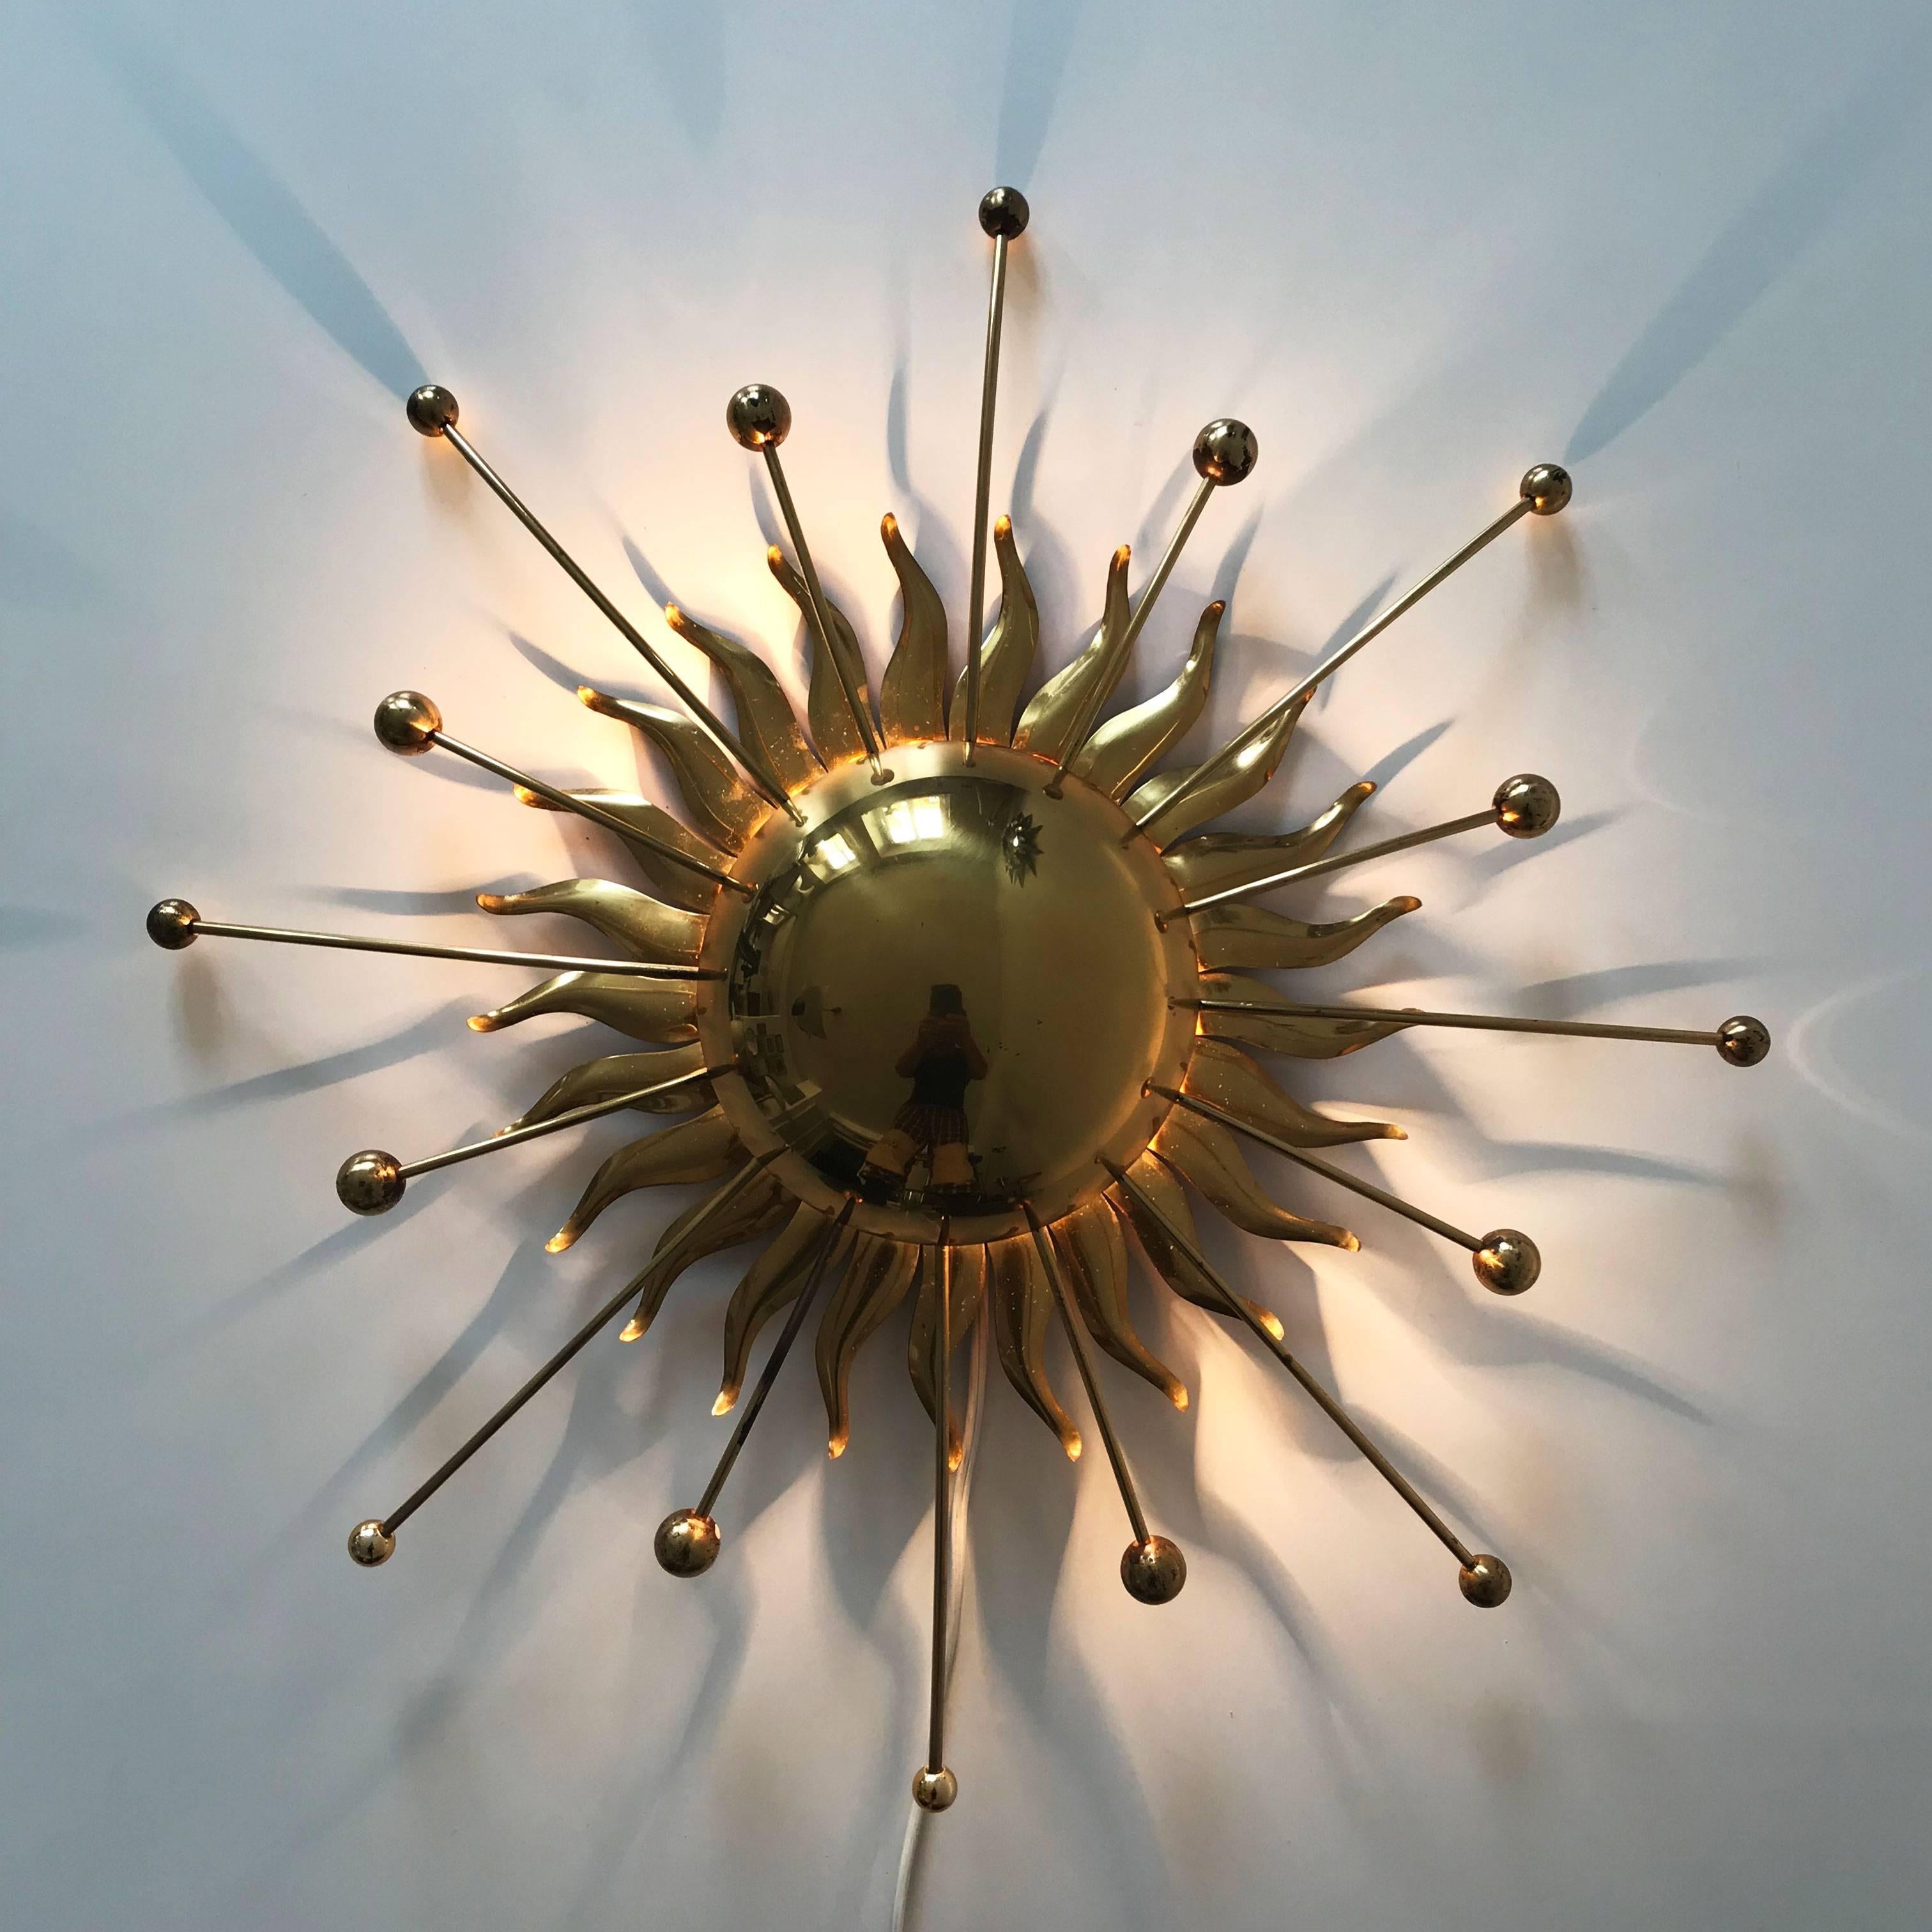 Extremely rare and stunning Mid-Century Modern Sputnik, atomic wall lamp or sconce sunburst from 1960s, Germany. Designed in shape of the sun bursting flames.
Executed completely in brass, the lamp has two E14 screw fit bulb holders. It is rewired,